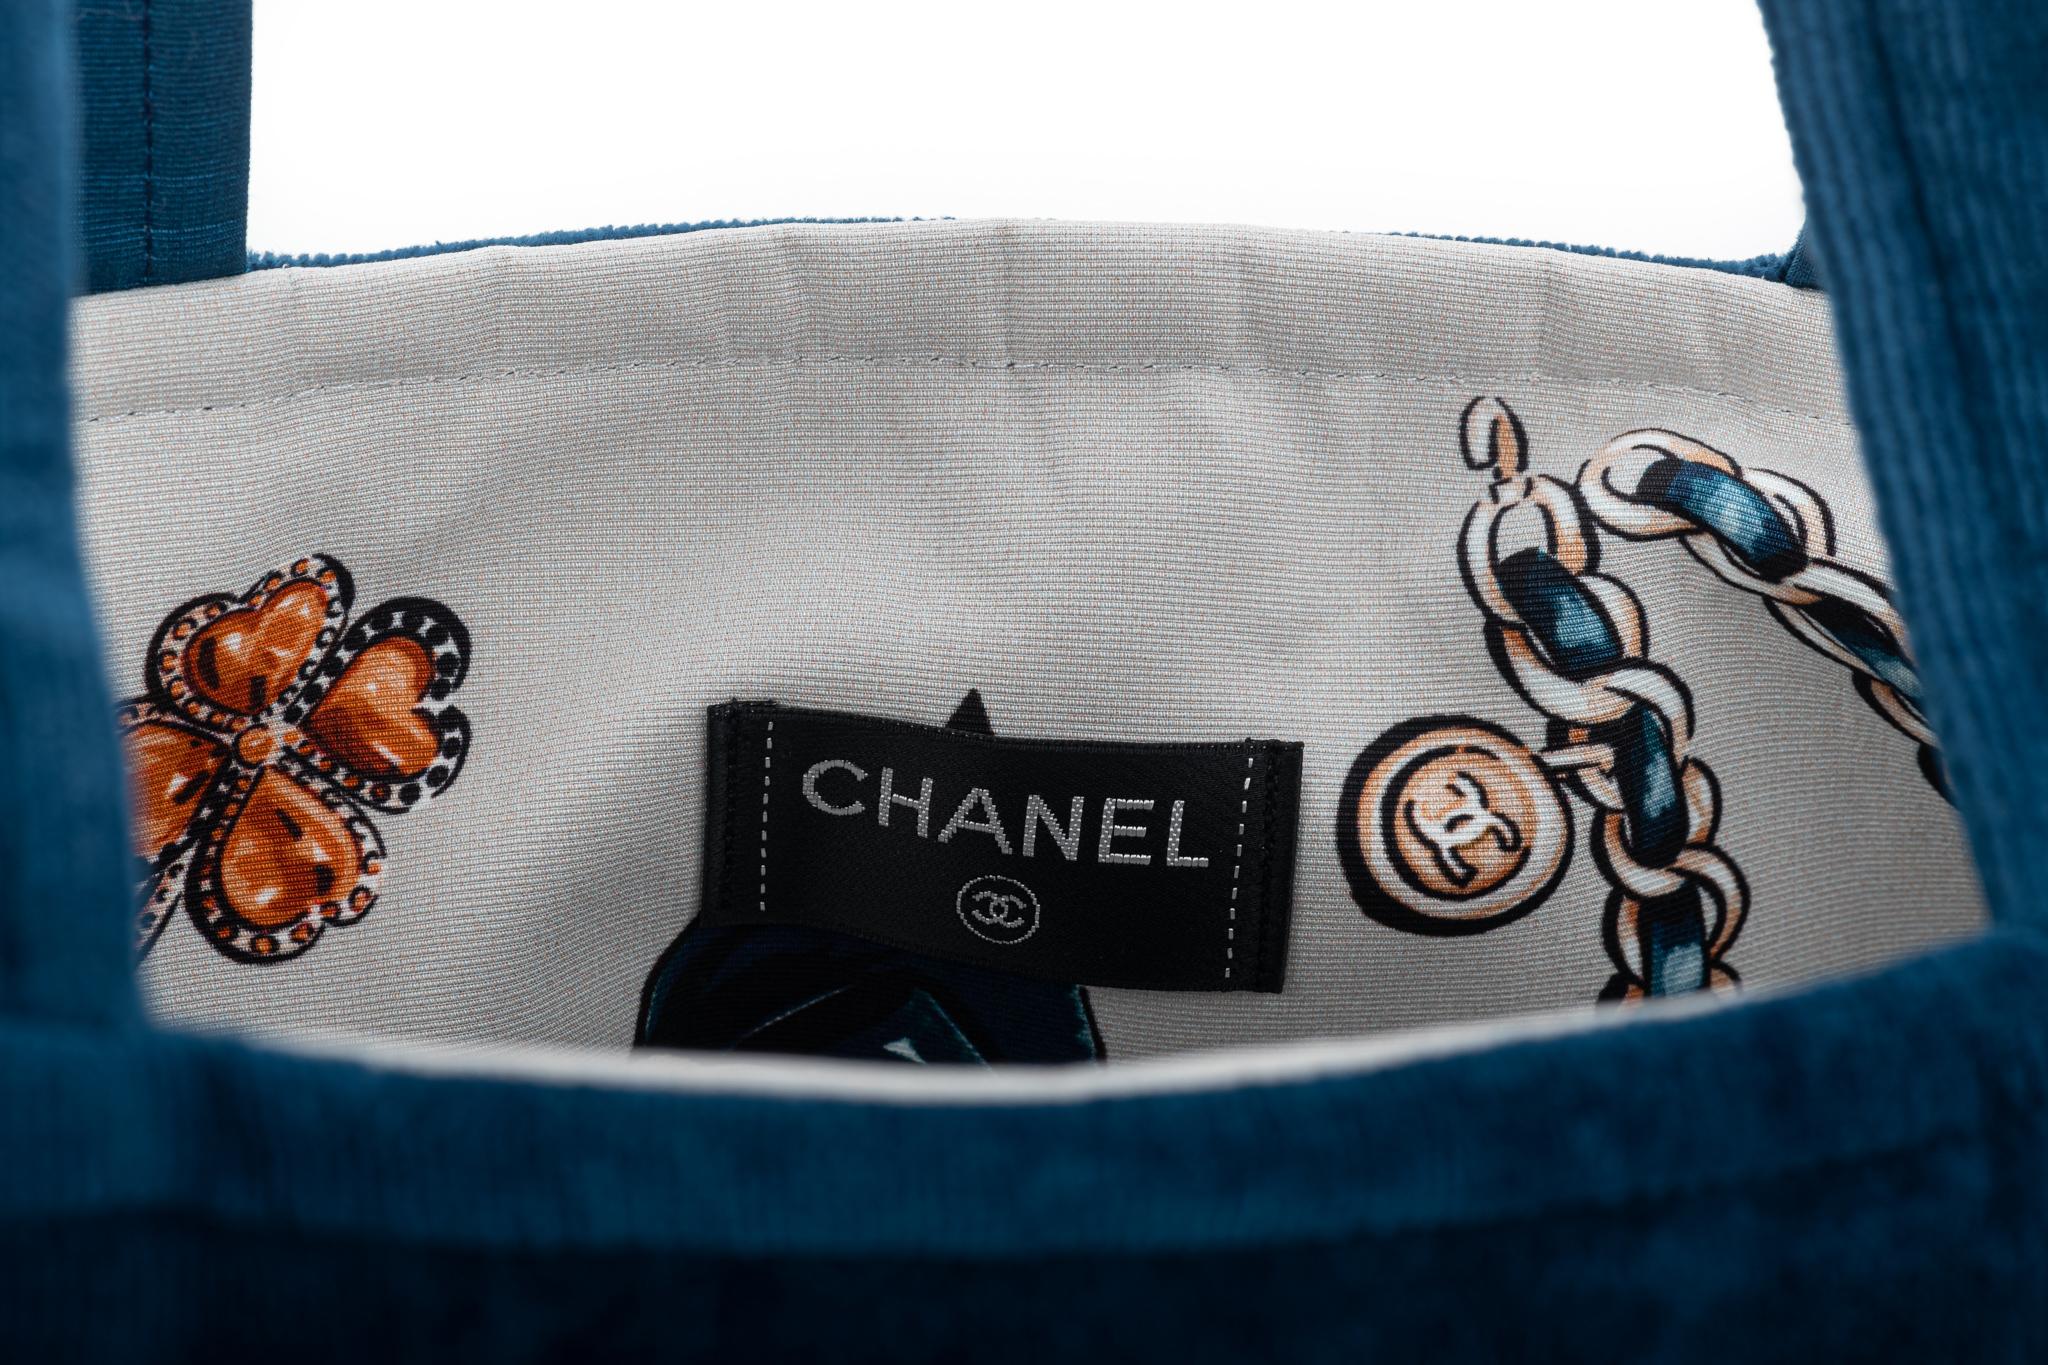 New Chanel Blue Beach Bag Towel Set Iconic Design For Sale 4